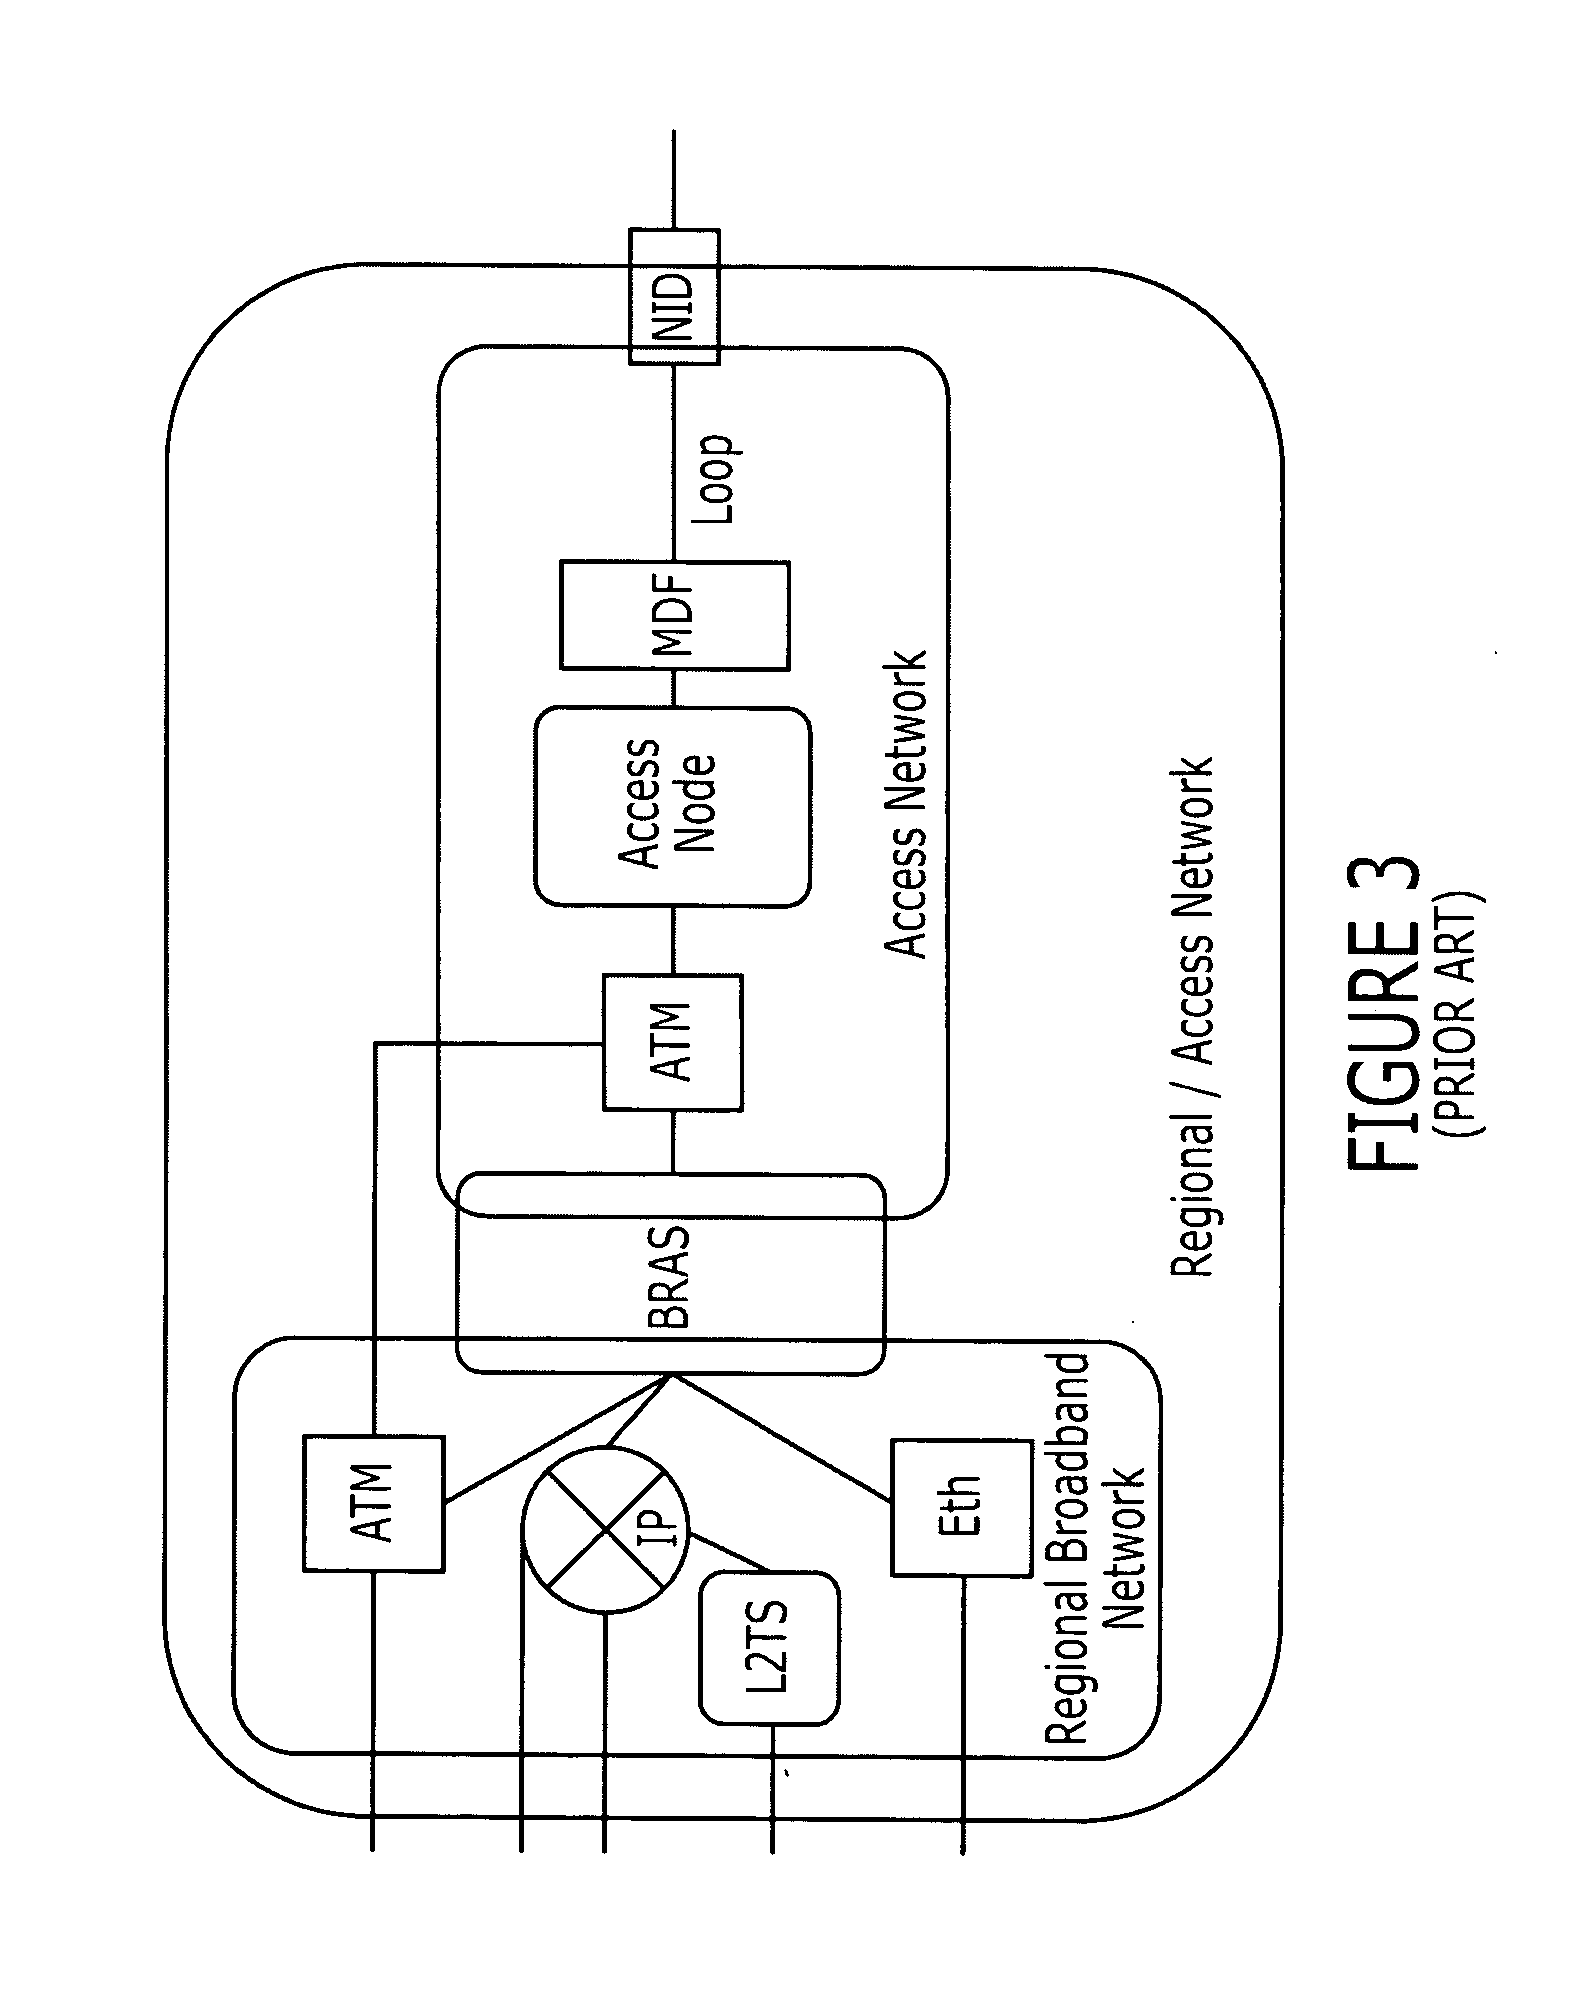 Methods, systems, and computer program products for managing admission control in a regional/access network based on user preferences